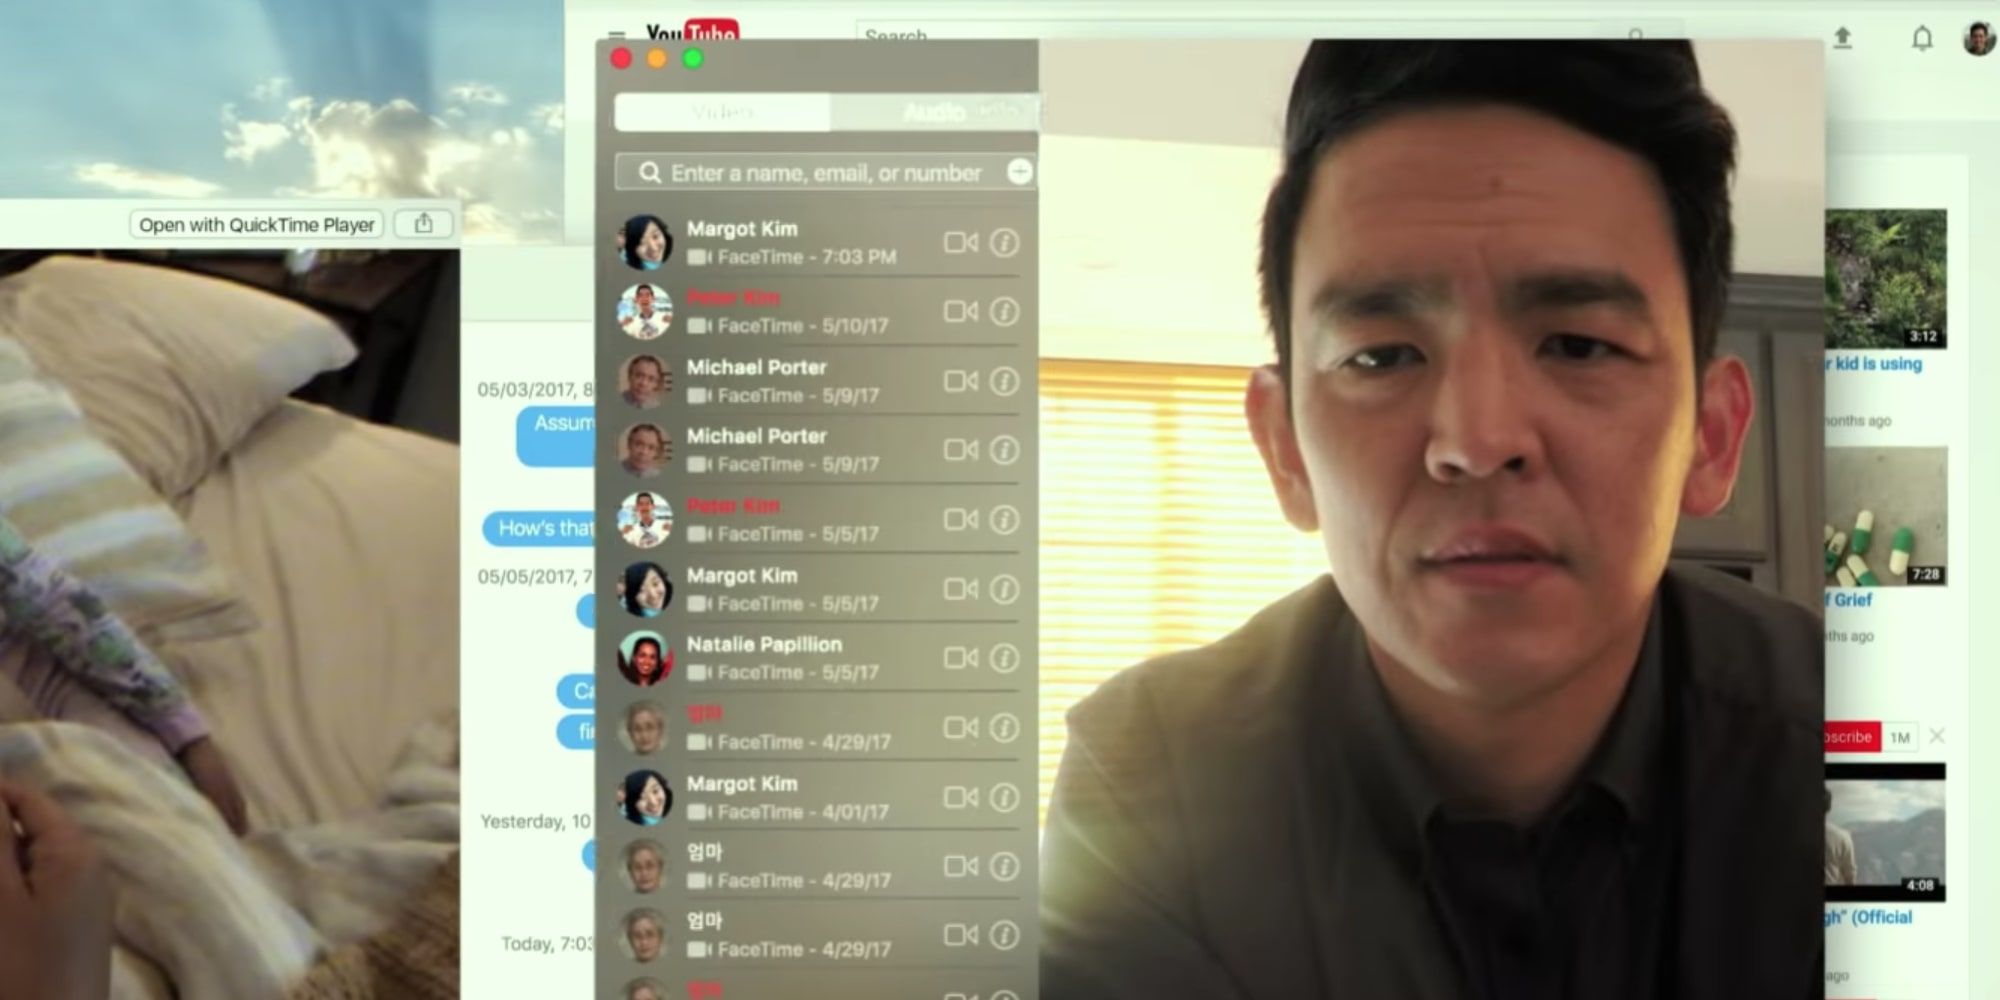 John Cho on Facetime in Searching